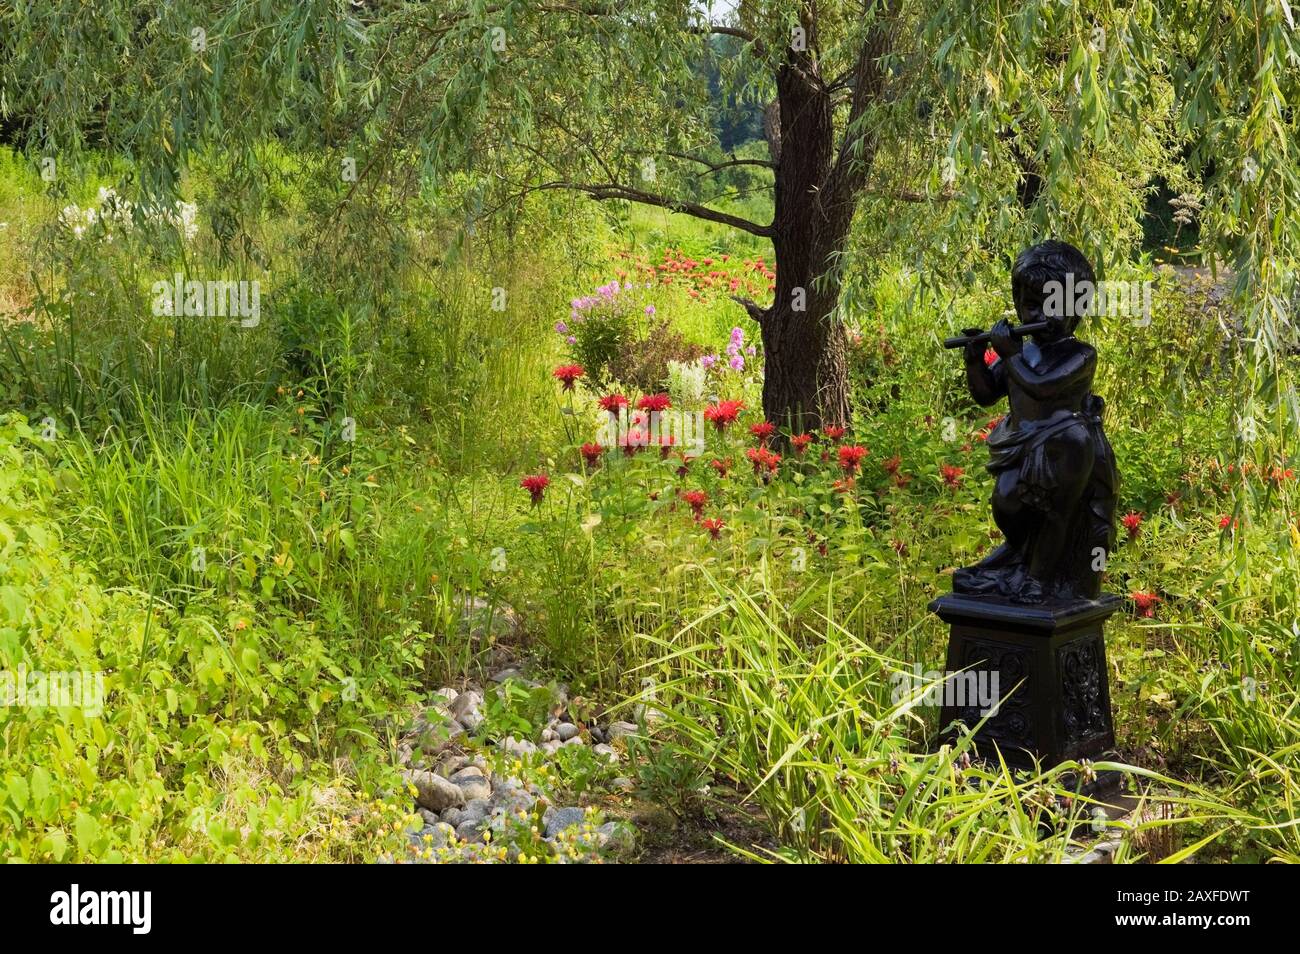 Black painted Renaissance statue of young boy playing a flute beneath a Salix alba 'Tristis' - Wilow tree underplanted with red Monarda flowers Stock Photo